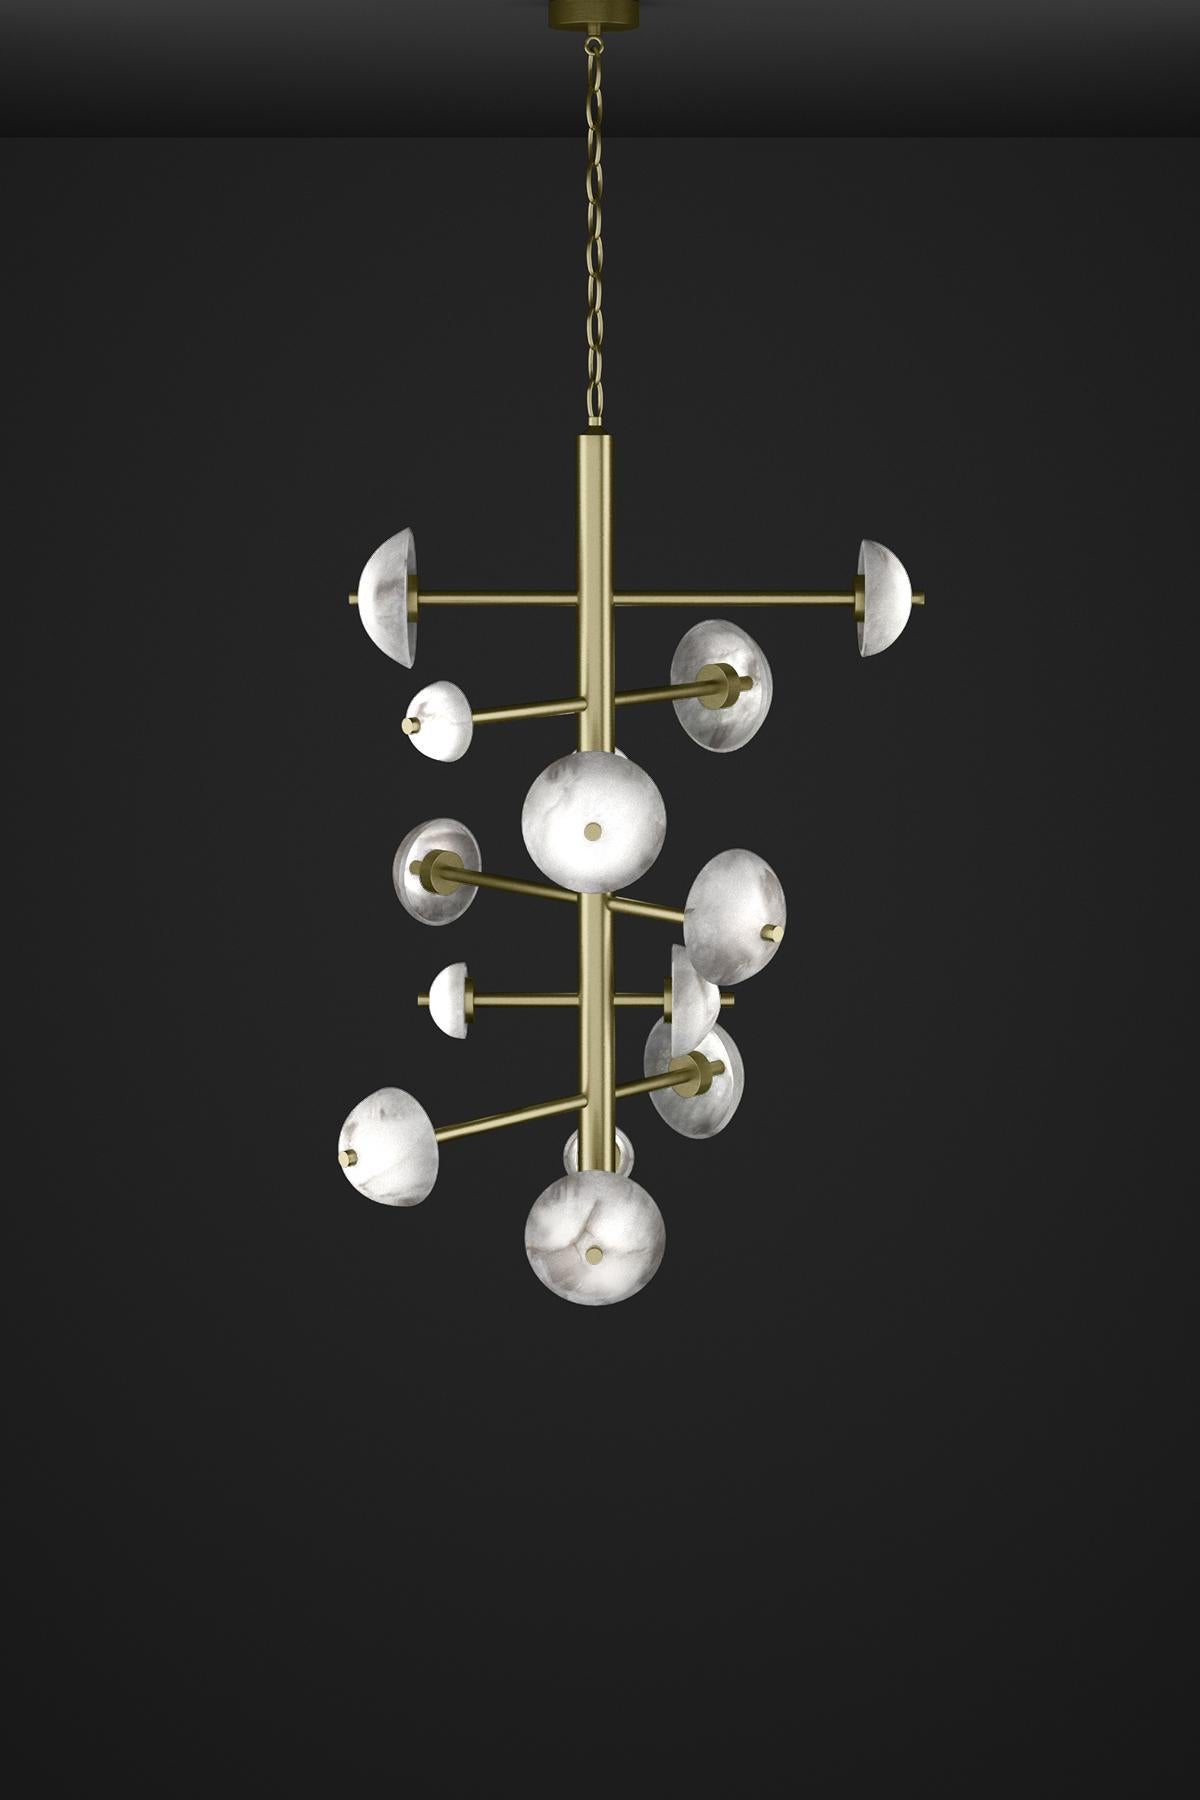 Apollo Brushed Brass Chandelier by Alabastro Italiano
Dimensions: D 70,5 x W 55 x H 111 cm.
Materials: White alabaster and brushed brass.

Available in different finishes: Shiny Silver, Bronze, Brushed Brass, Ruggine of Florence, Brushed Burnished,